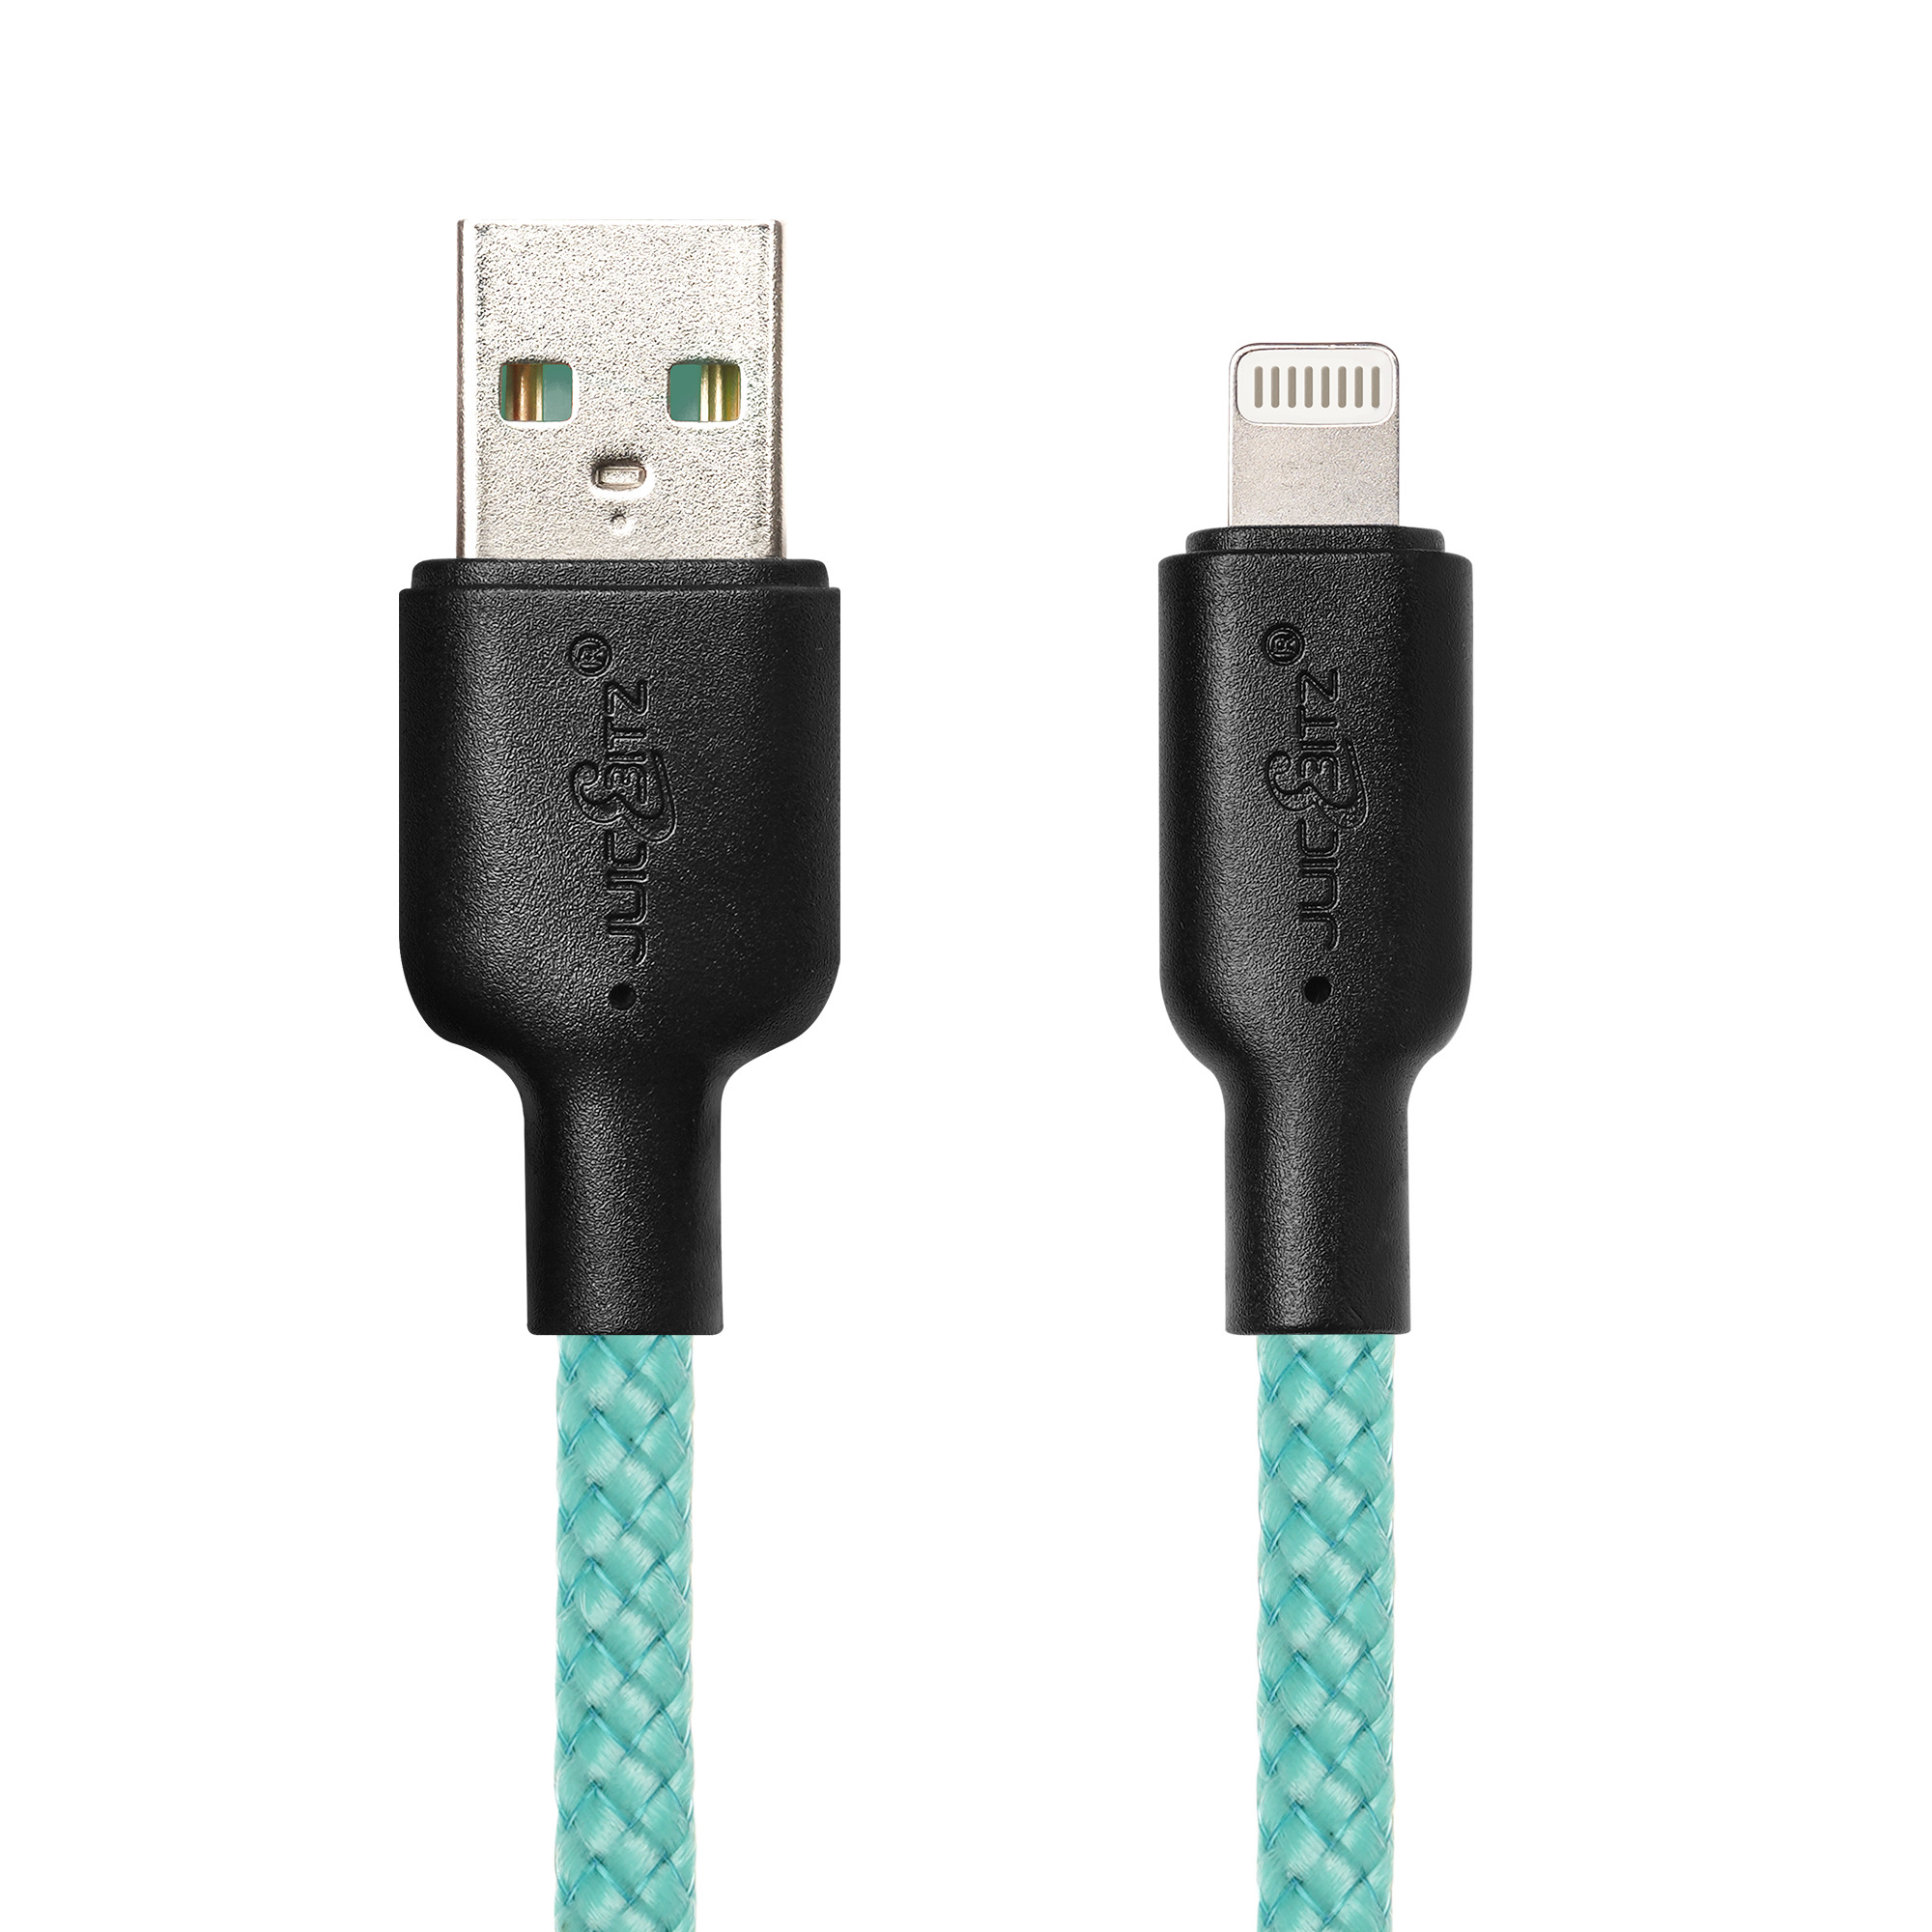 Braided Heavy Duty USB Charger Cable Data Sync Wire Lead for iPhone, iPad, iPod - Turquoise